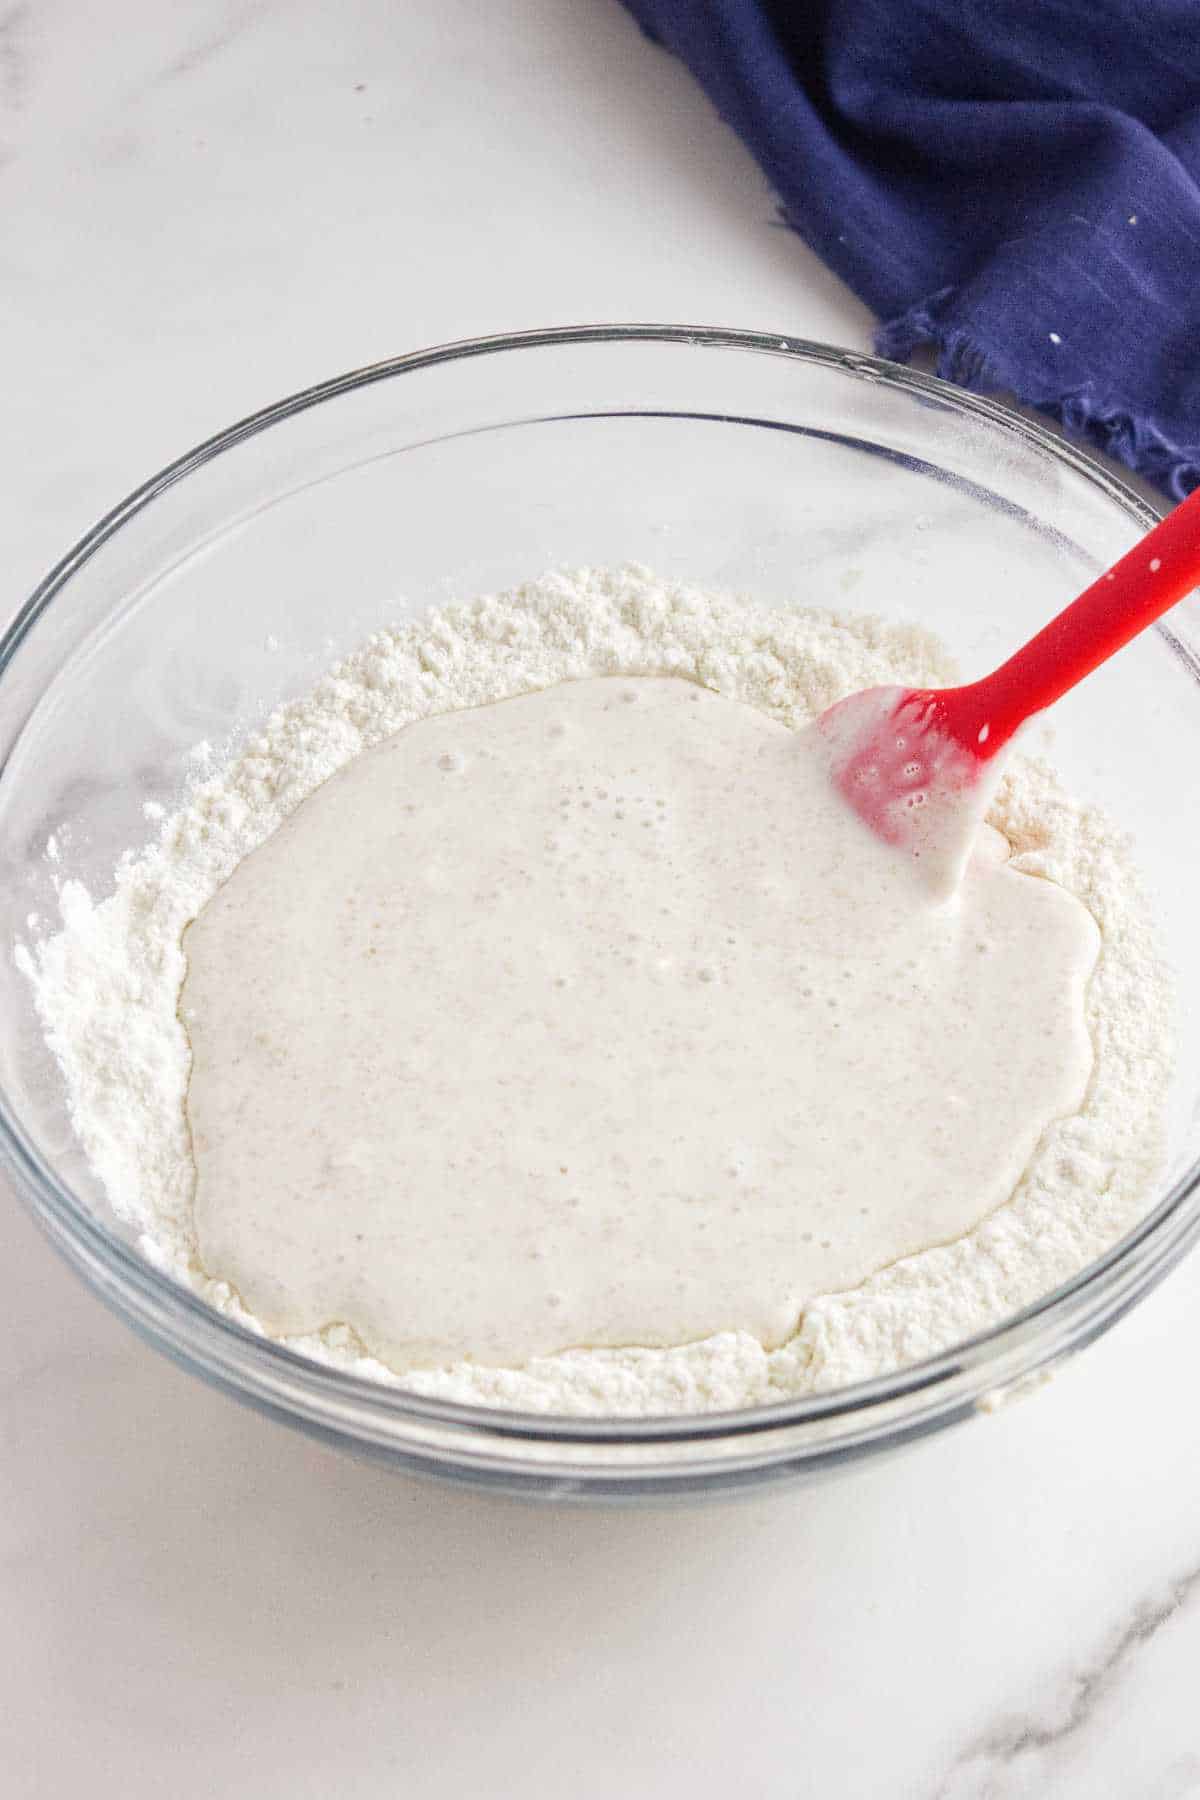 wet ingredients added to a bowl of flour.